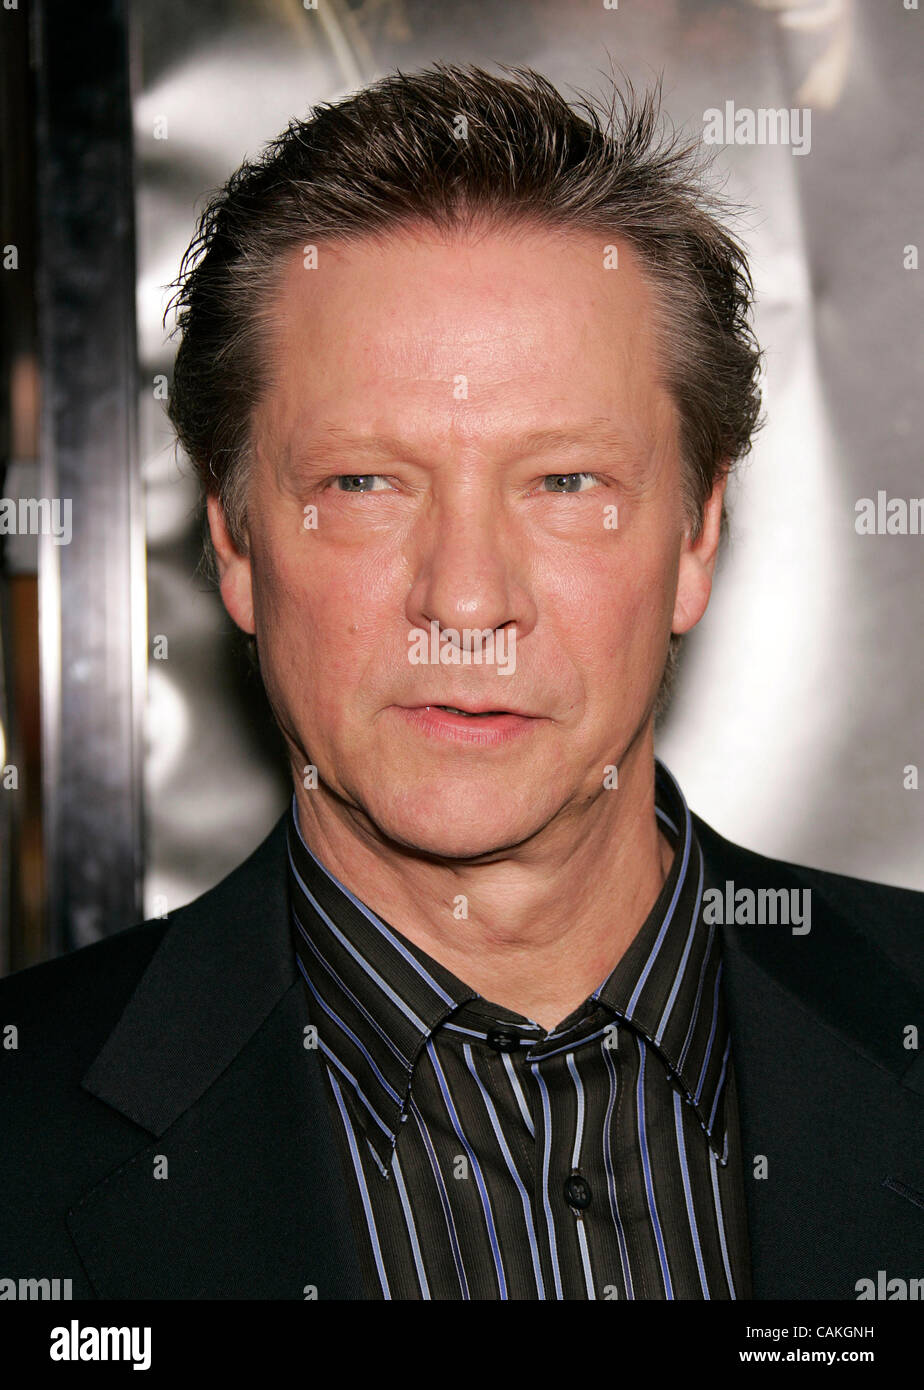 Sep 17, 2007 - Westwood, California, USA - Actor CHRIS COOPER at 'The Kingdom' Los Angeles Premiere held at the Mann Village Theatre. (Credit Image: © Lisa O'Connor/ZUMA Press) Stock Photo